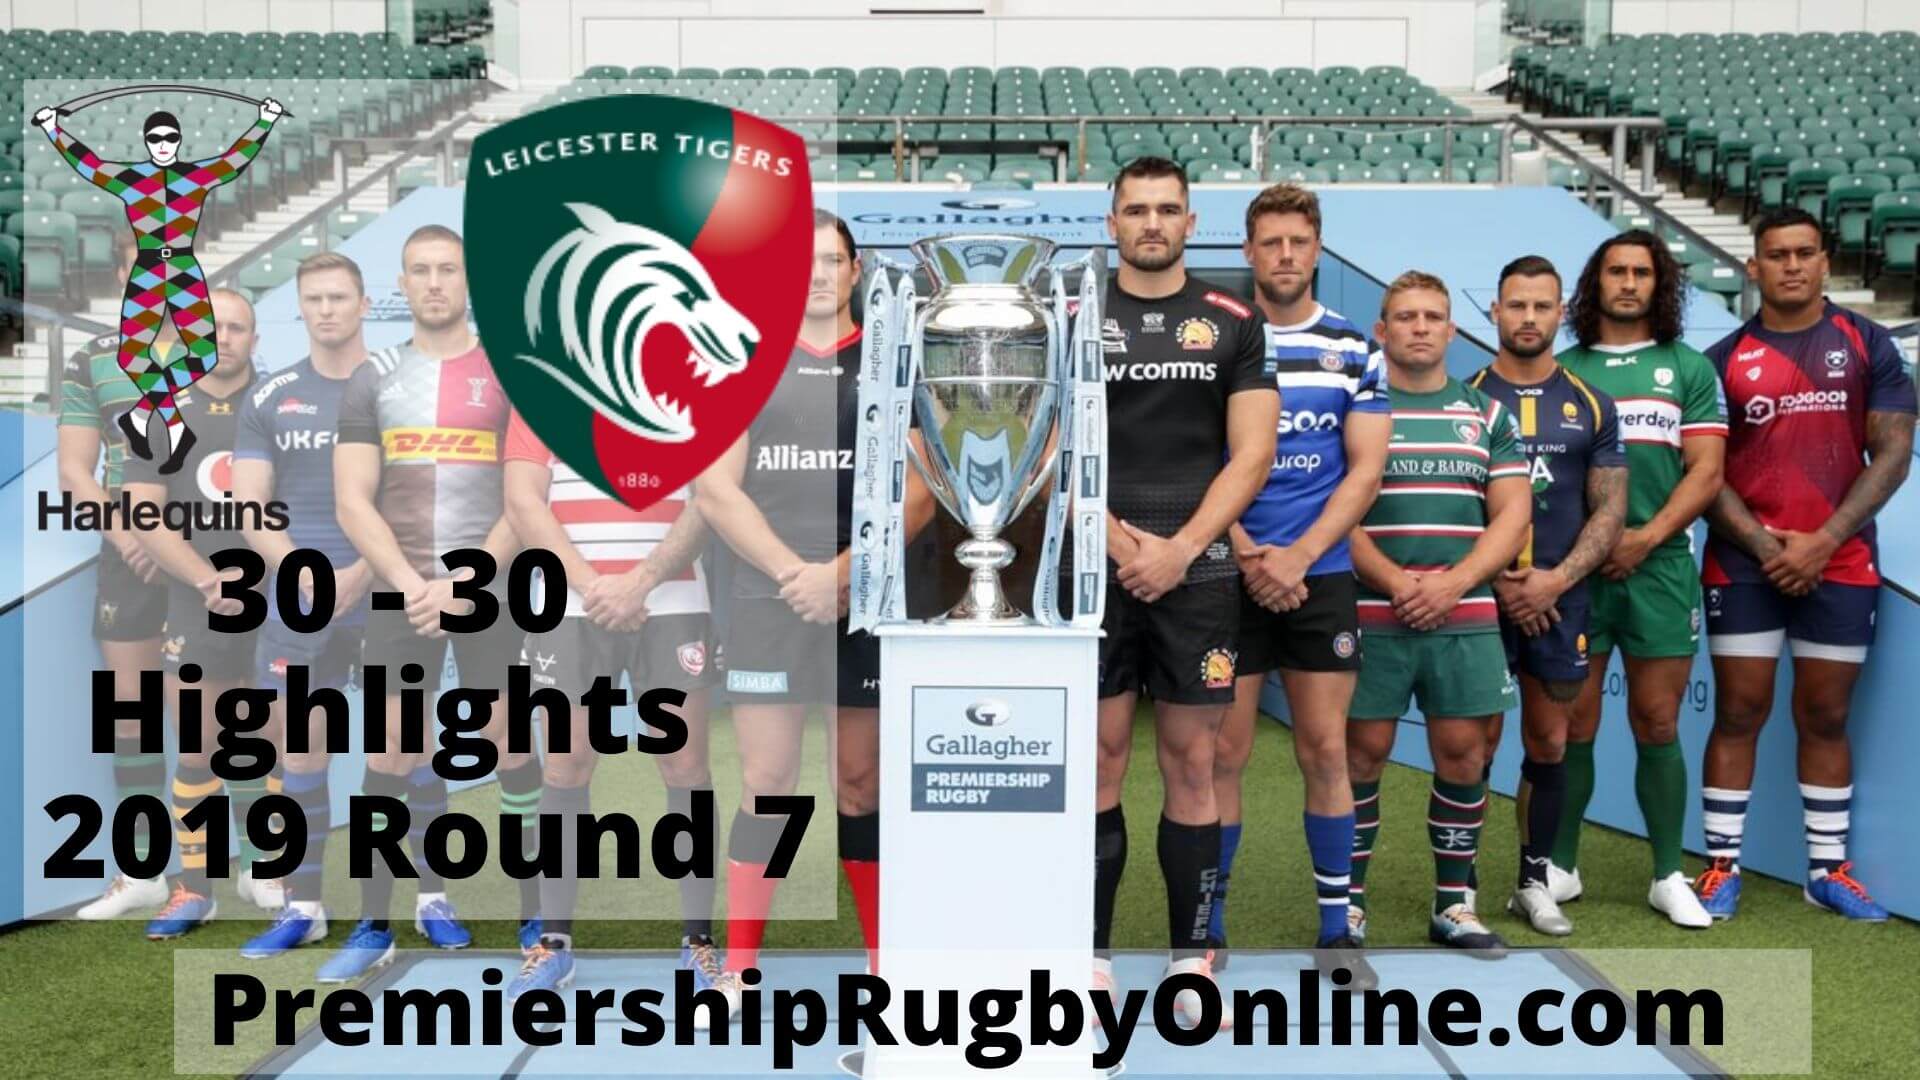 Harlequins Vs Leicester Tigers Highlights 2019 rd 7